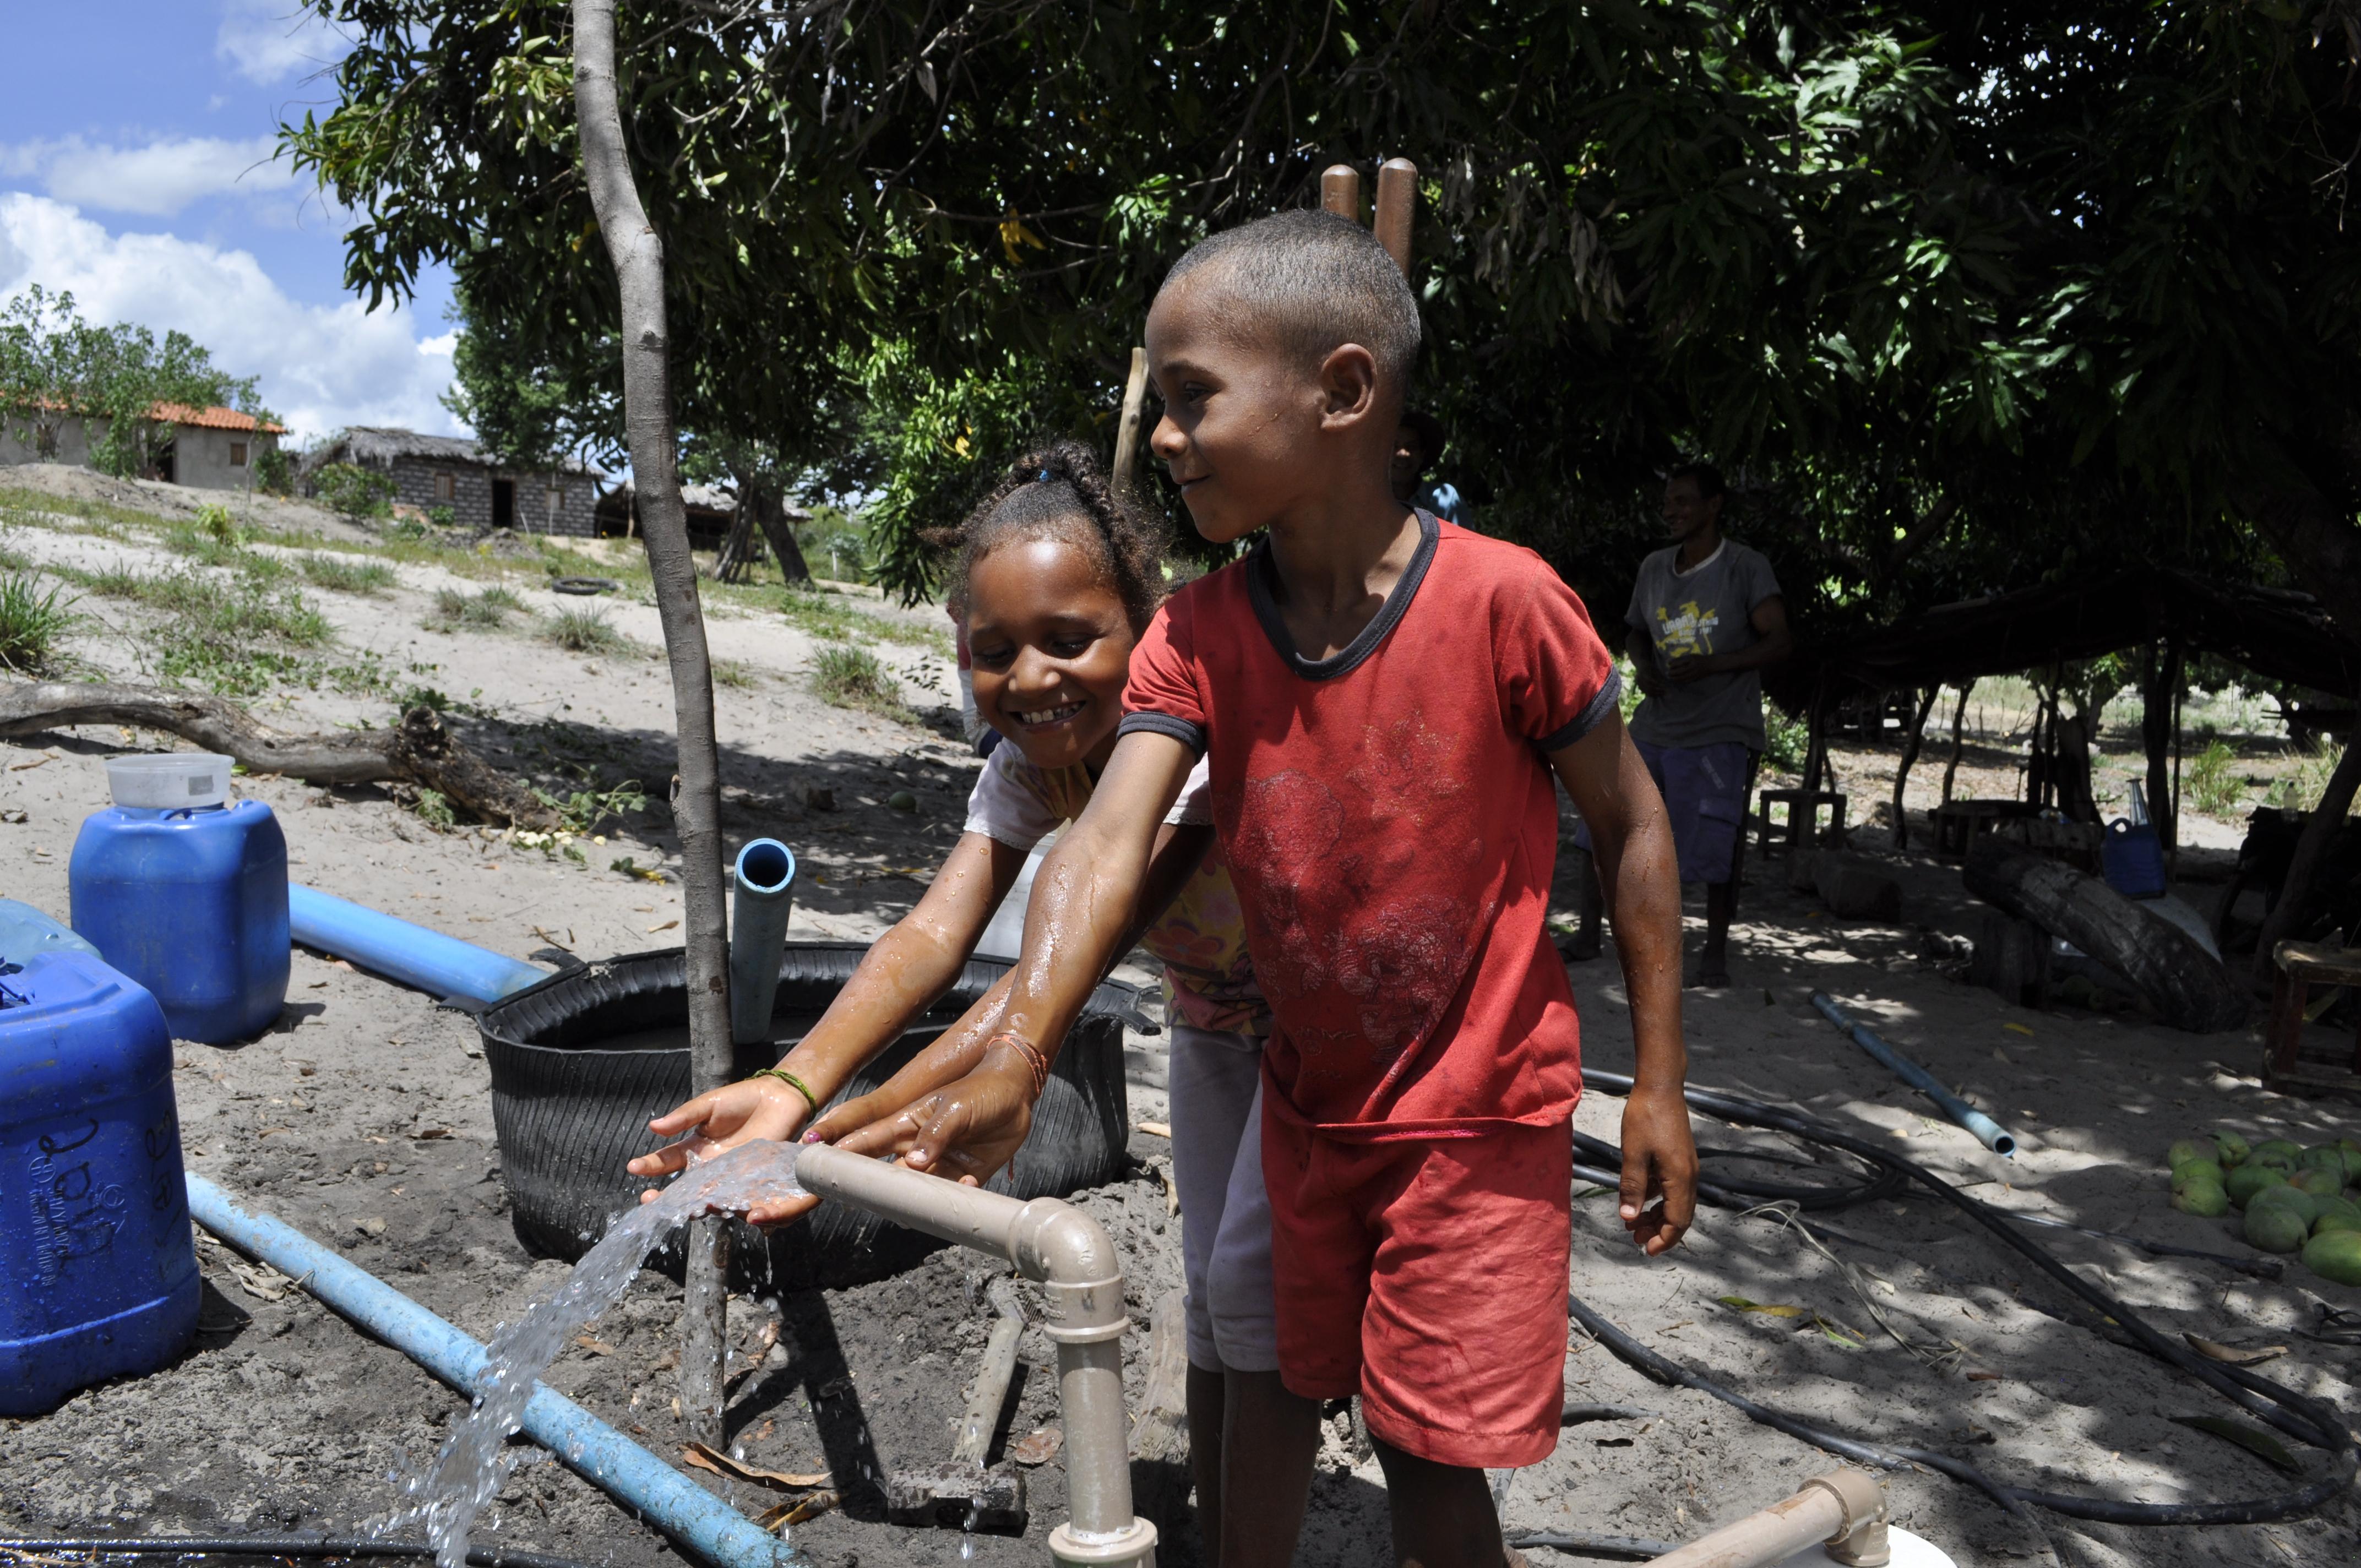 Water-well building projects make life in Brazil easier